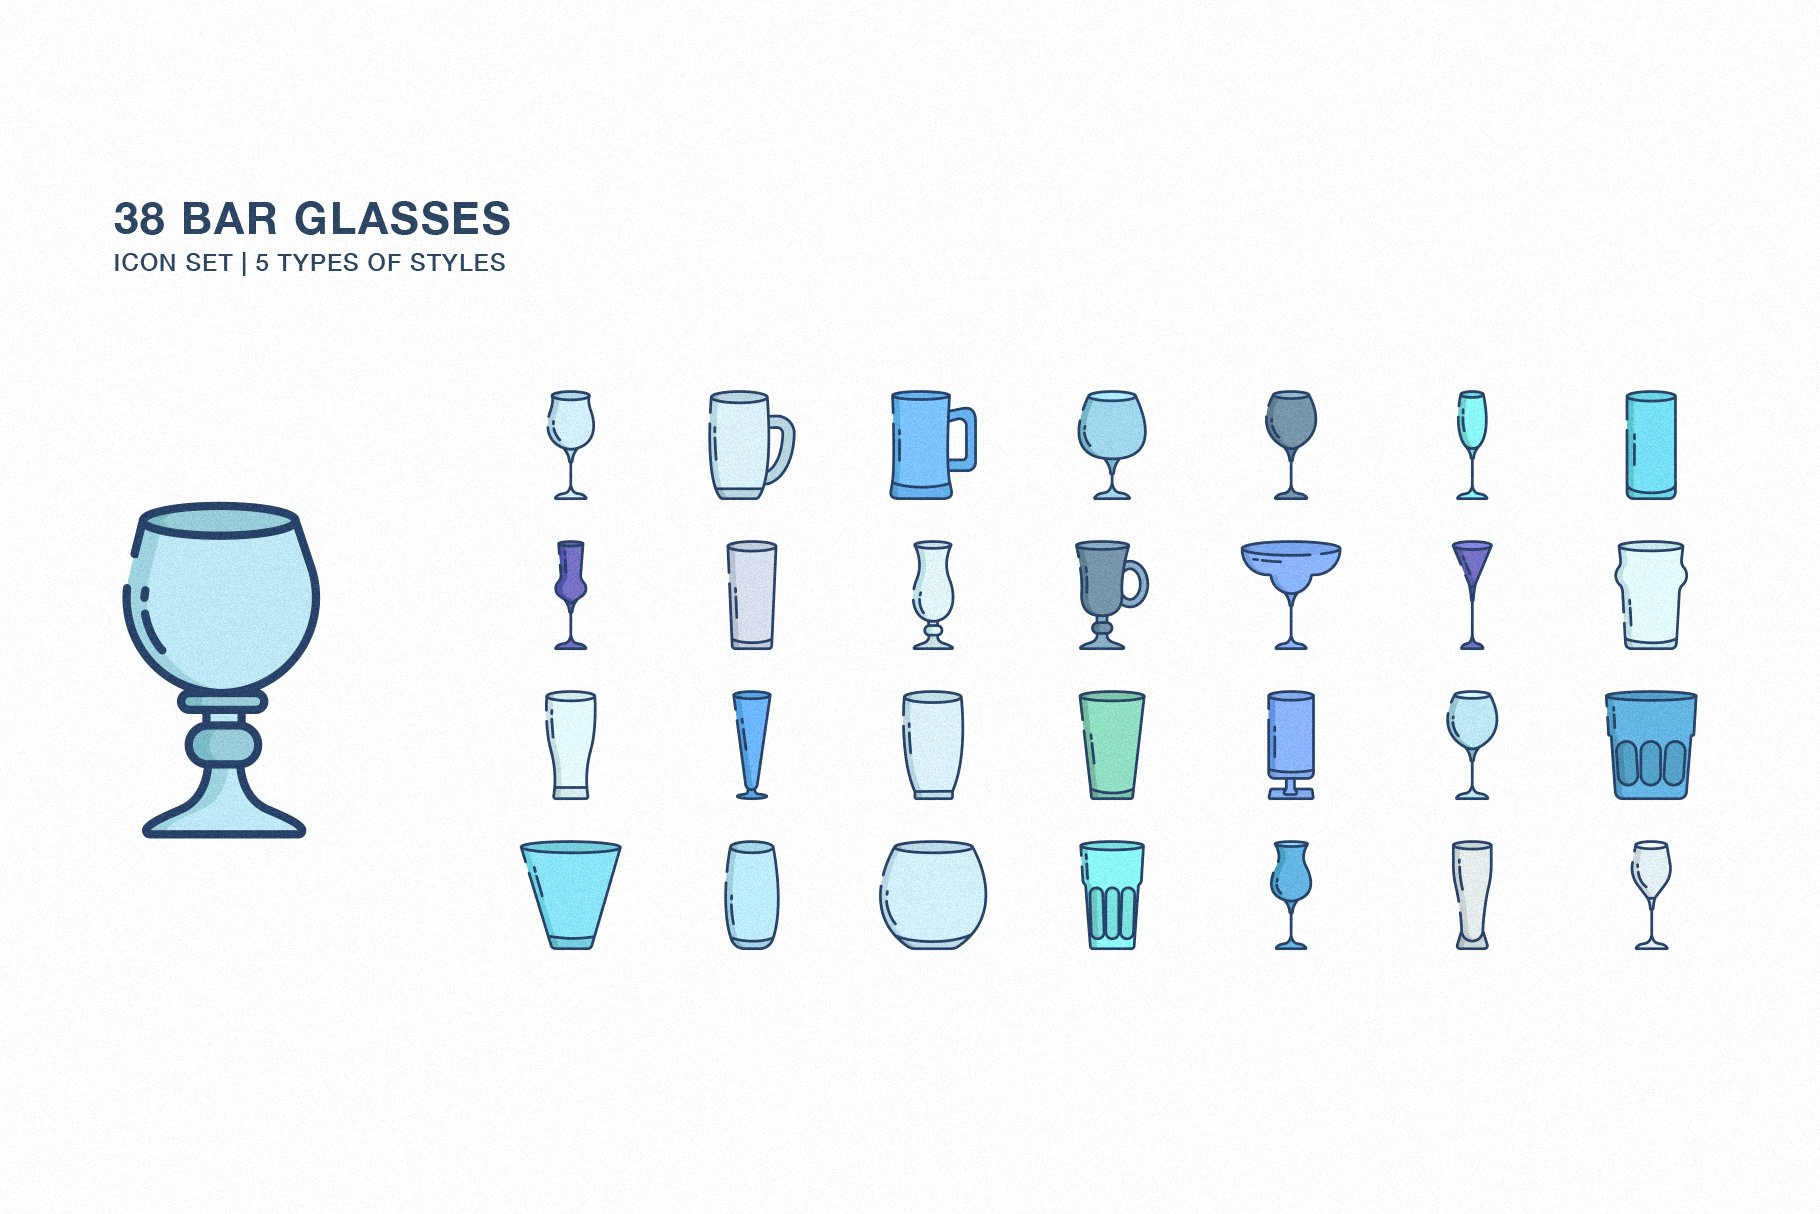 Bar glasses types guide flat icons on dark Vector Image